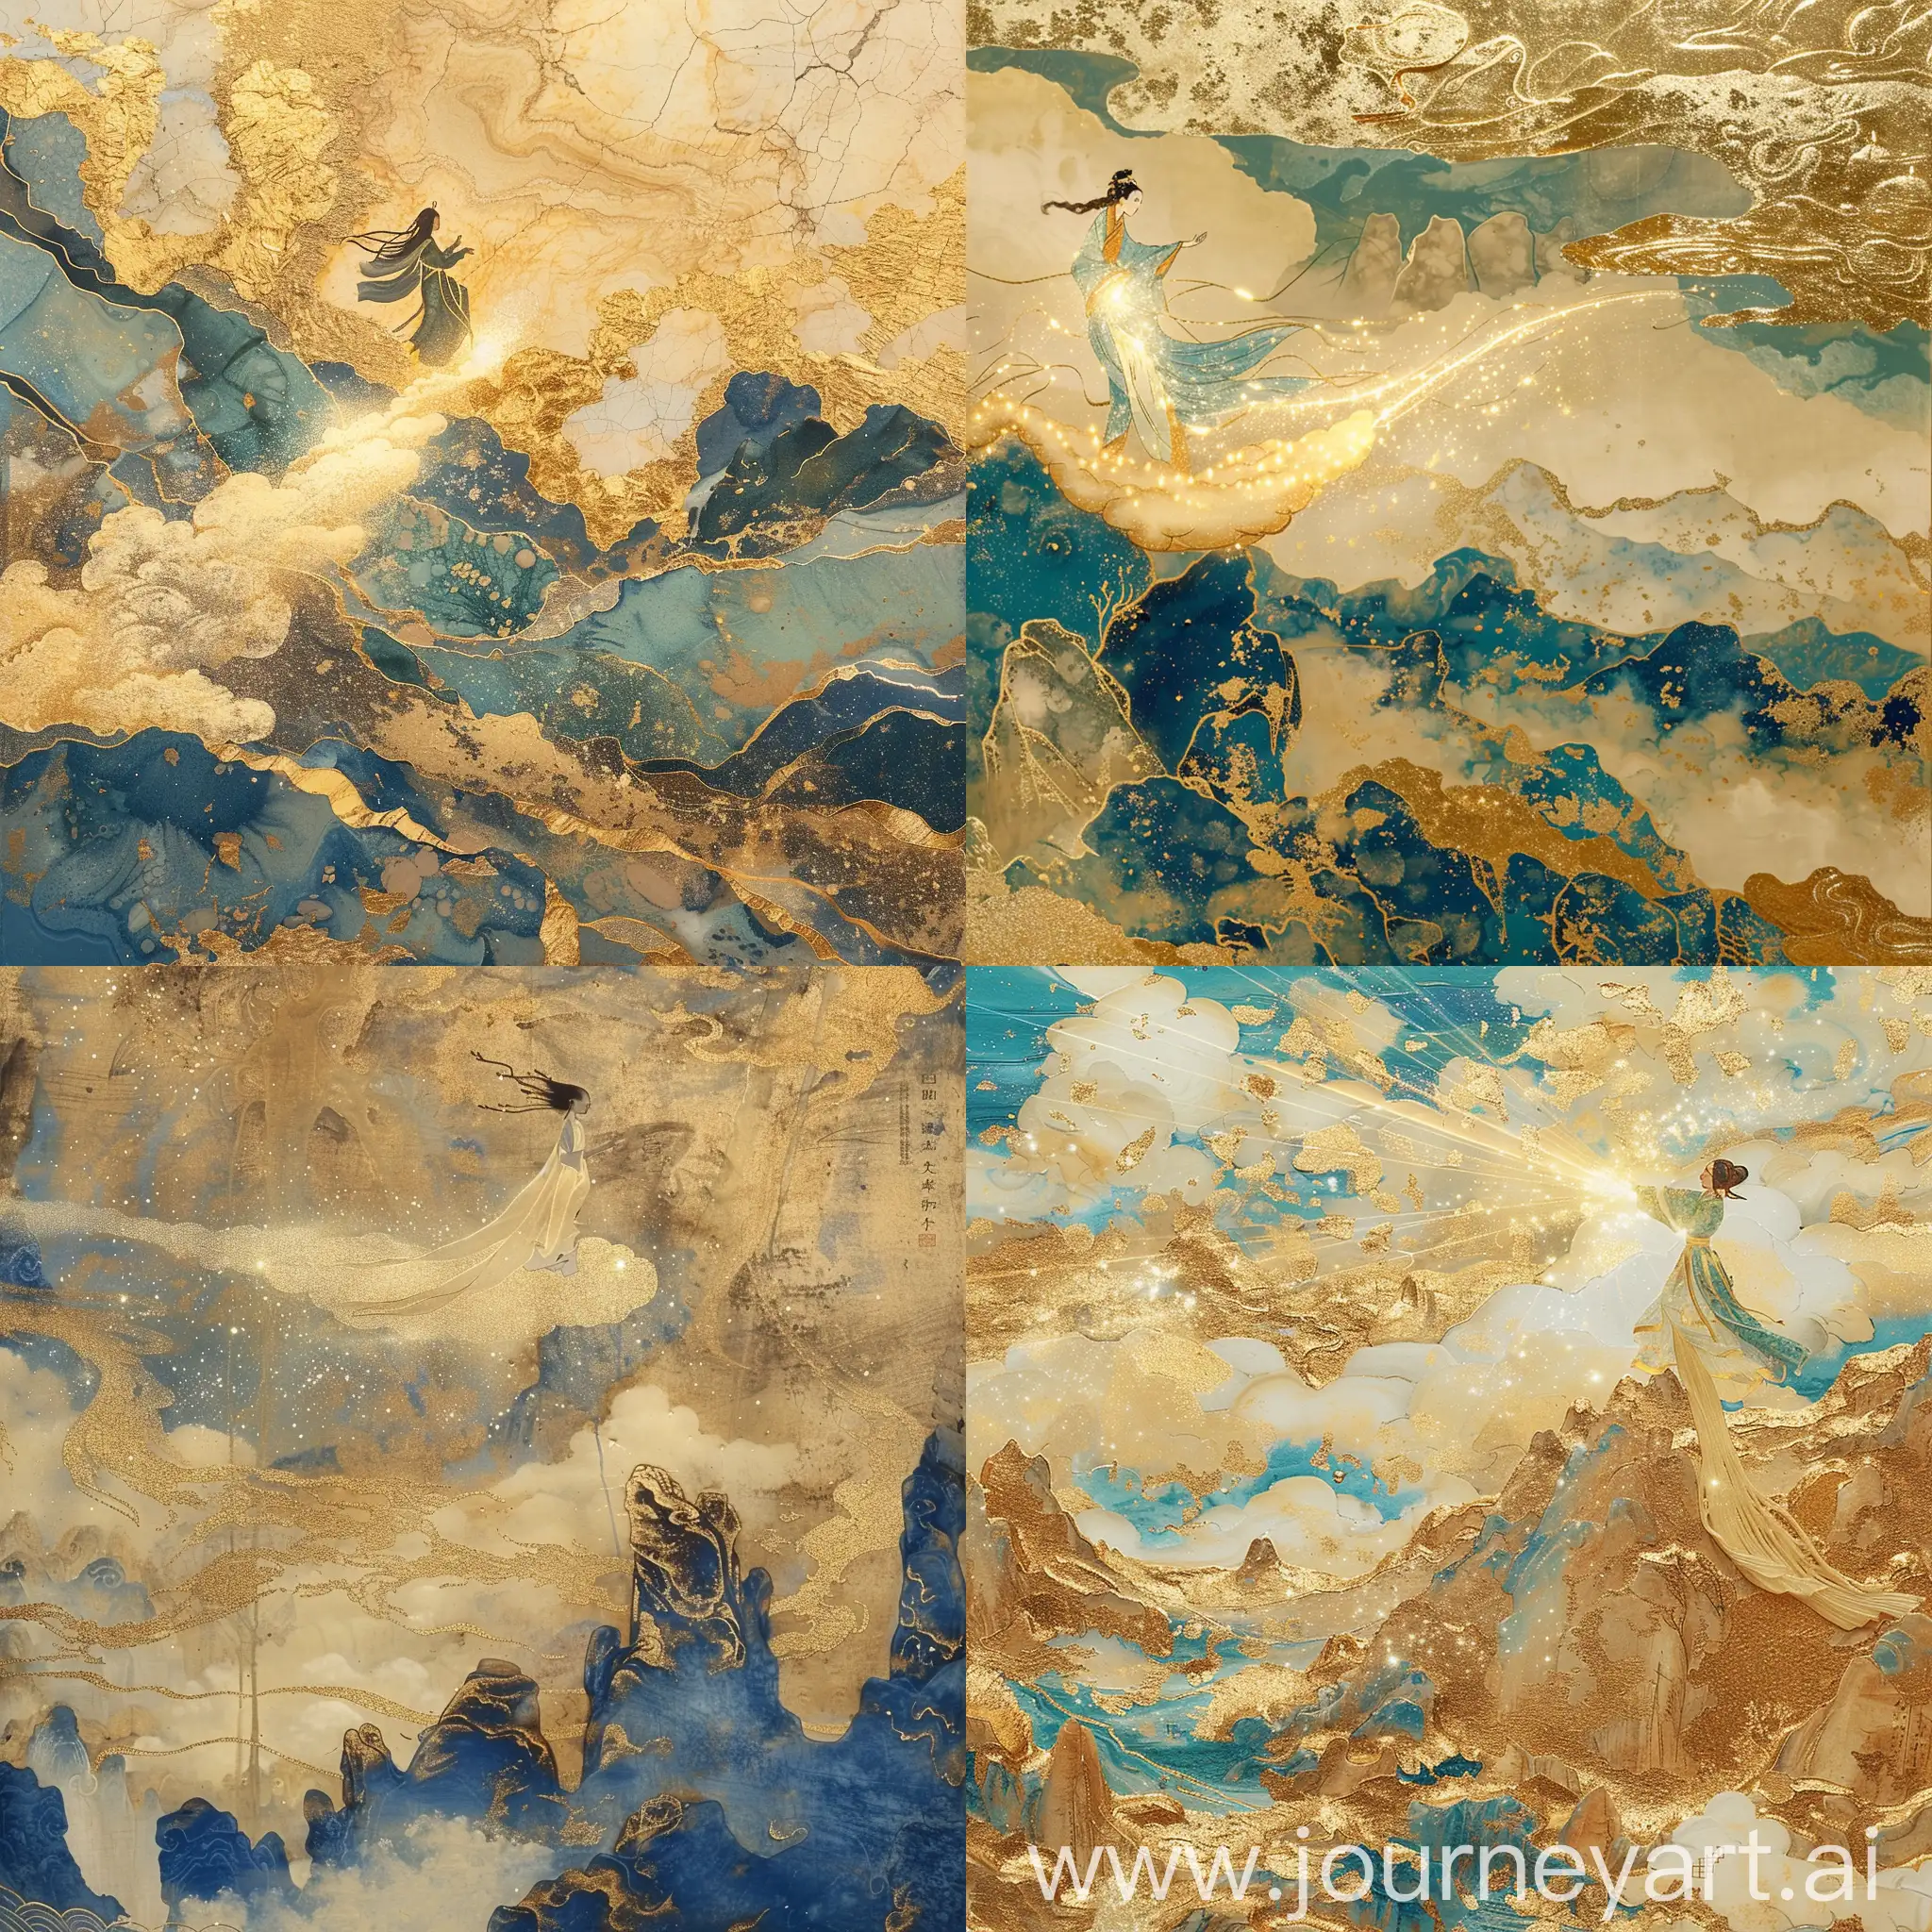 Gilded-Woman-Soaring-on-Clouds-Ethereal-Dunhuangstyle-Art